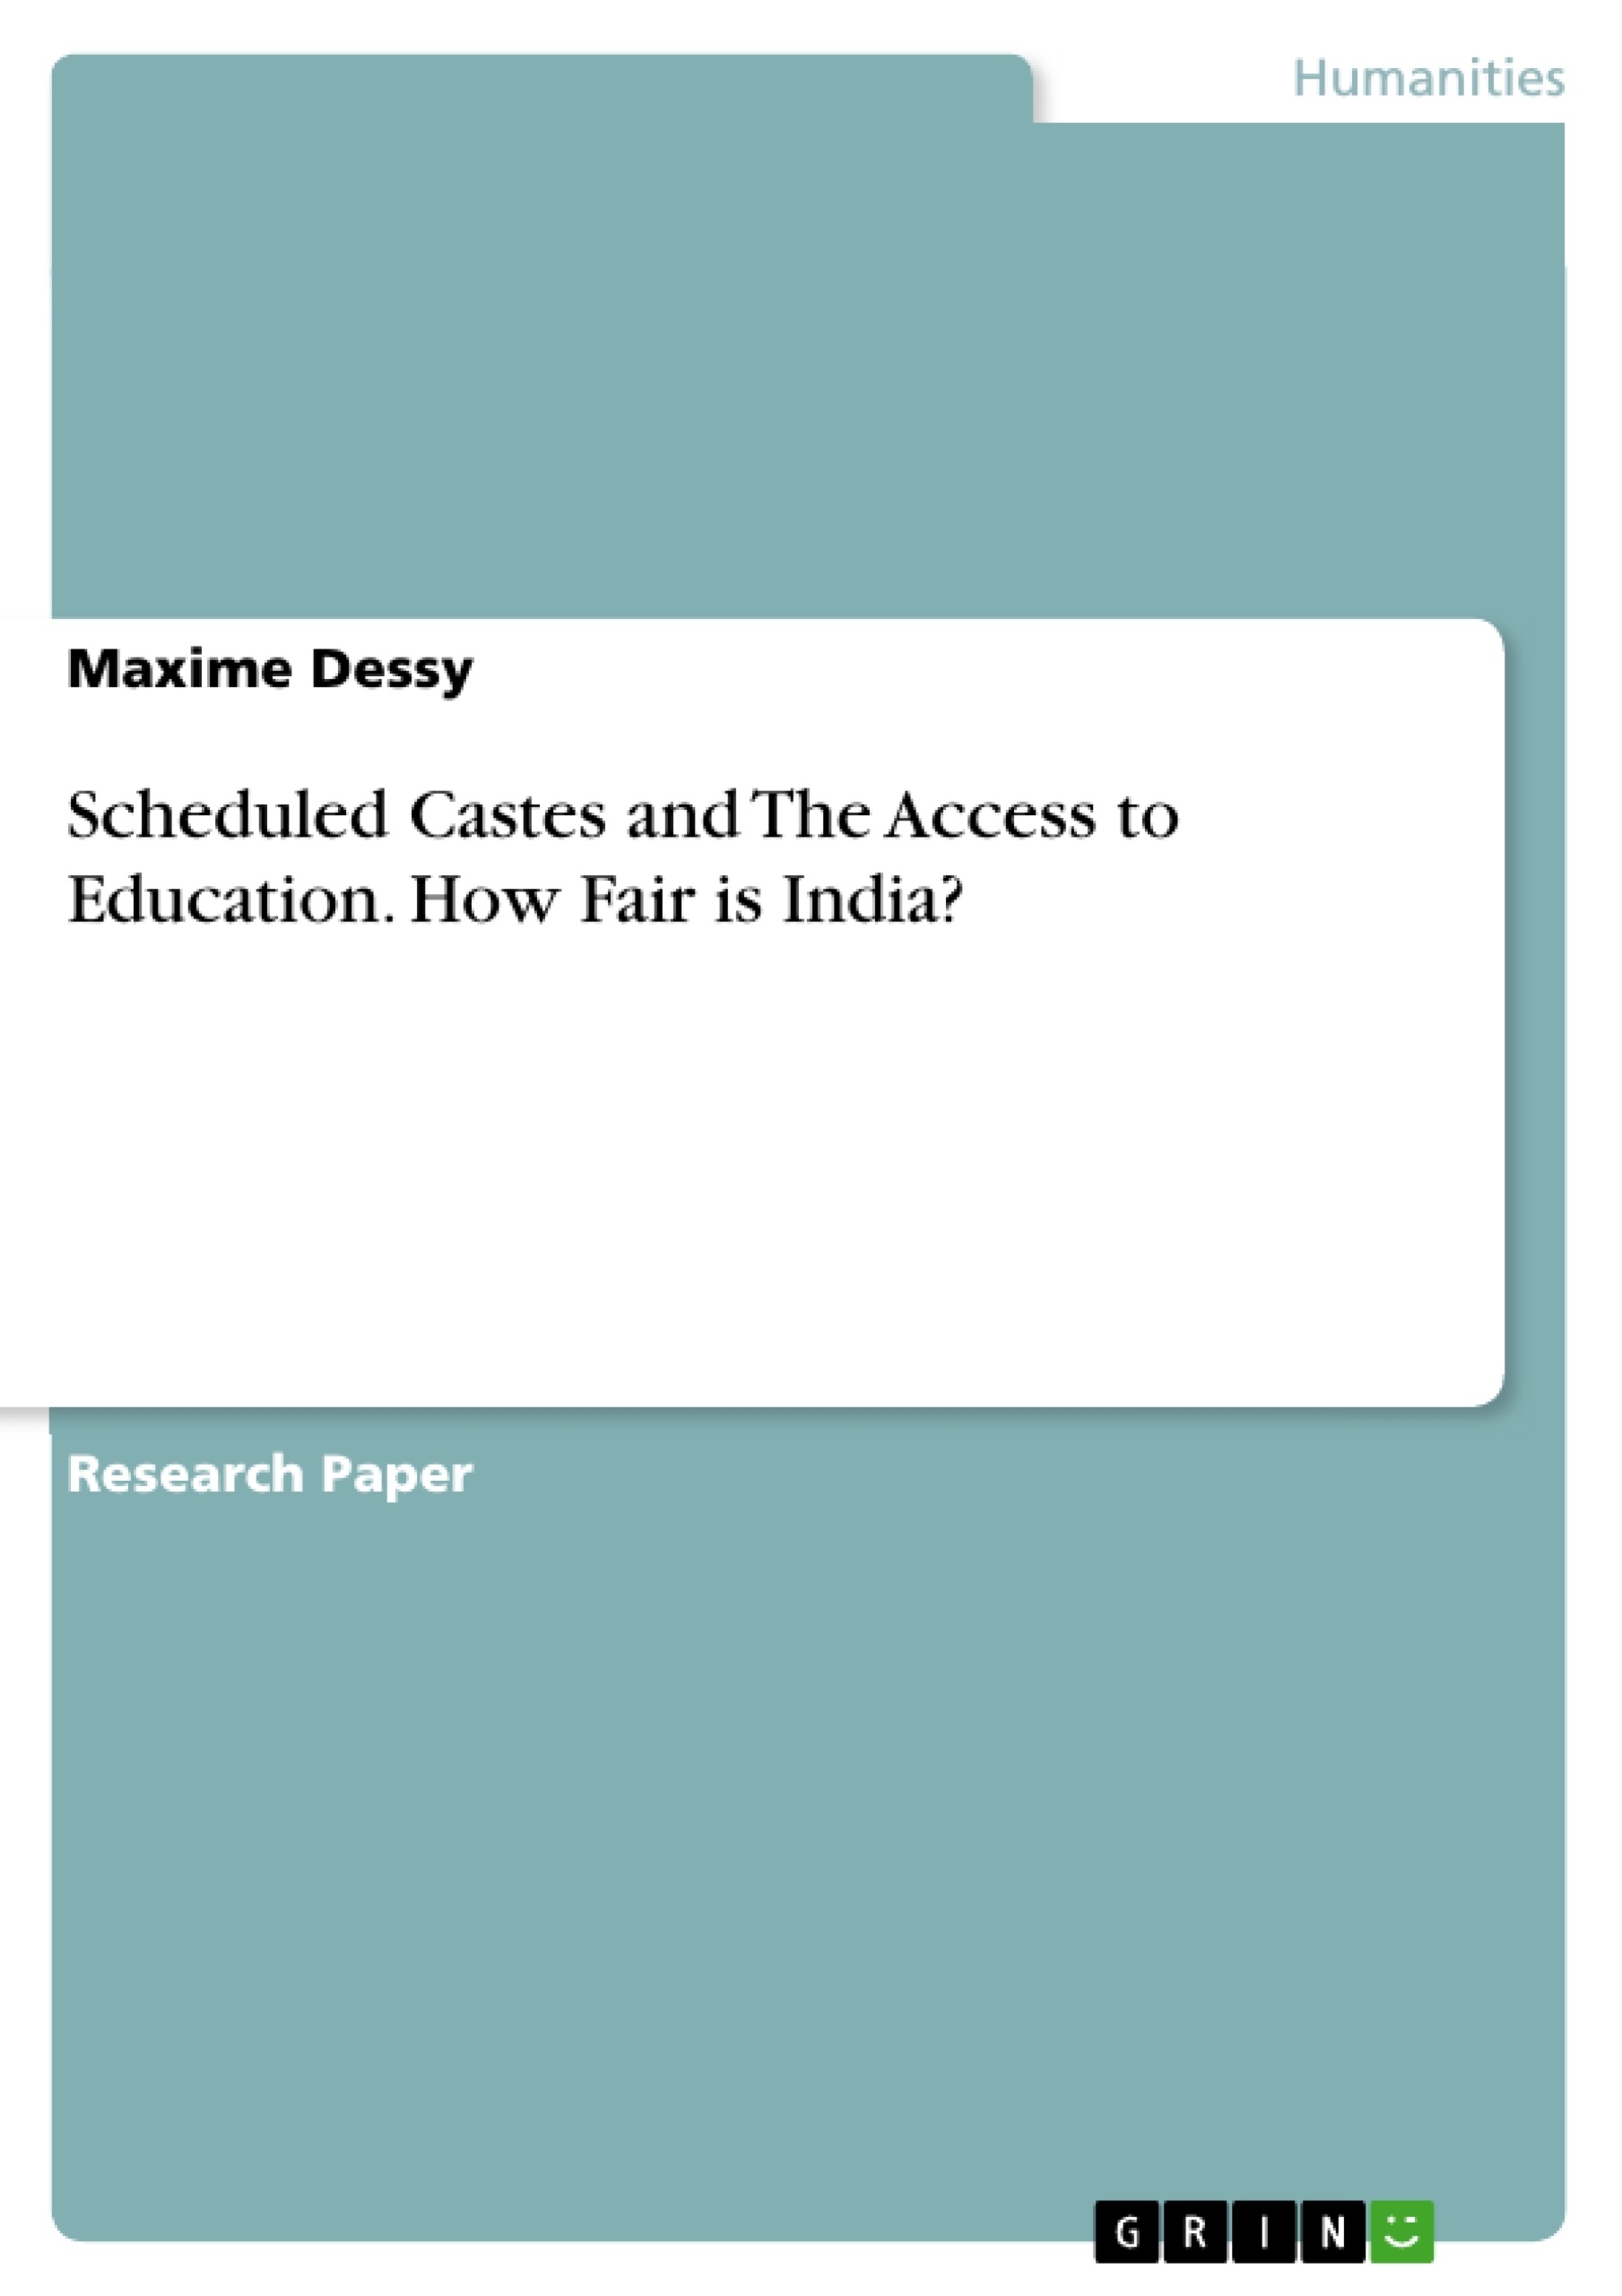 Título: Scheduled Castes and The Access to Education. How Fair is India?